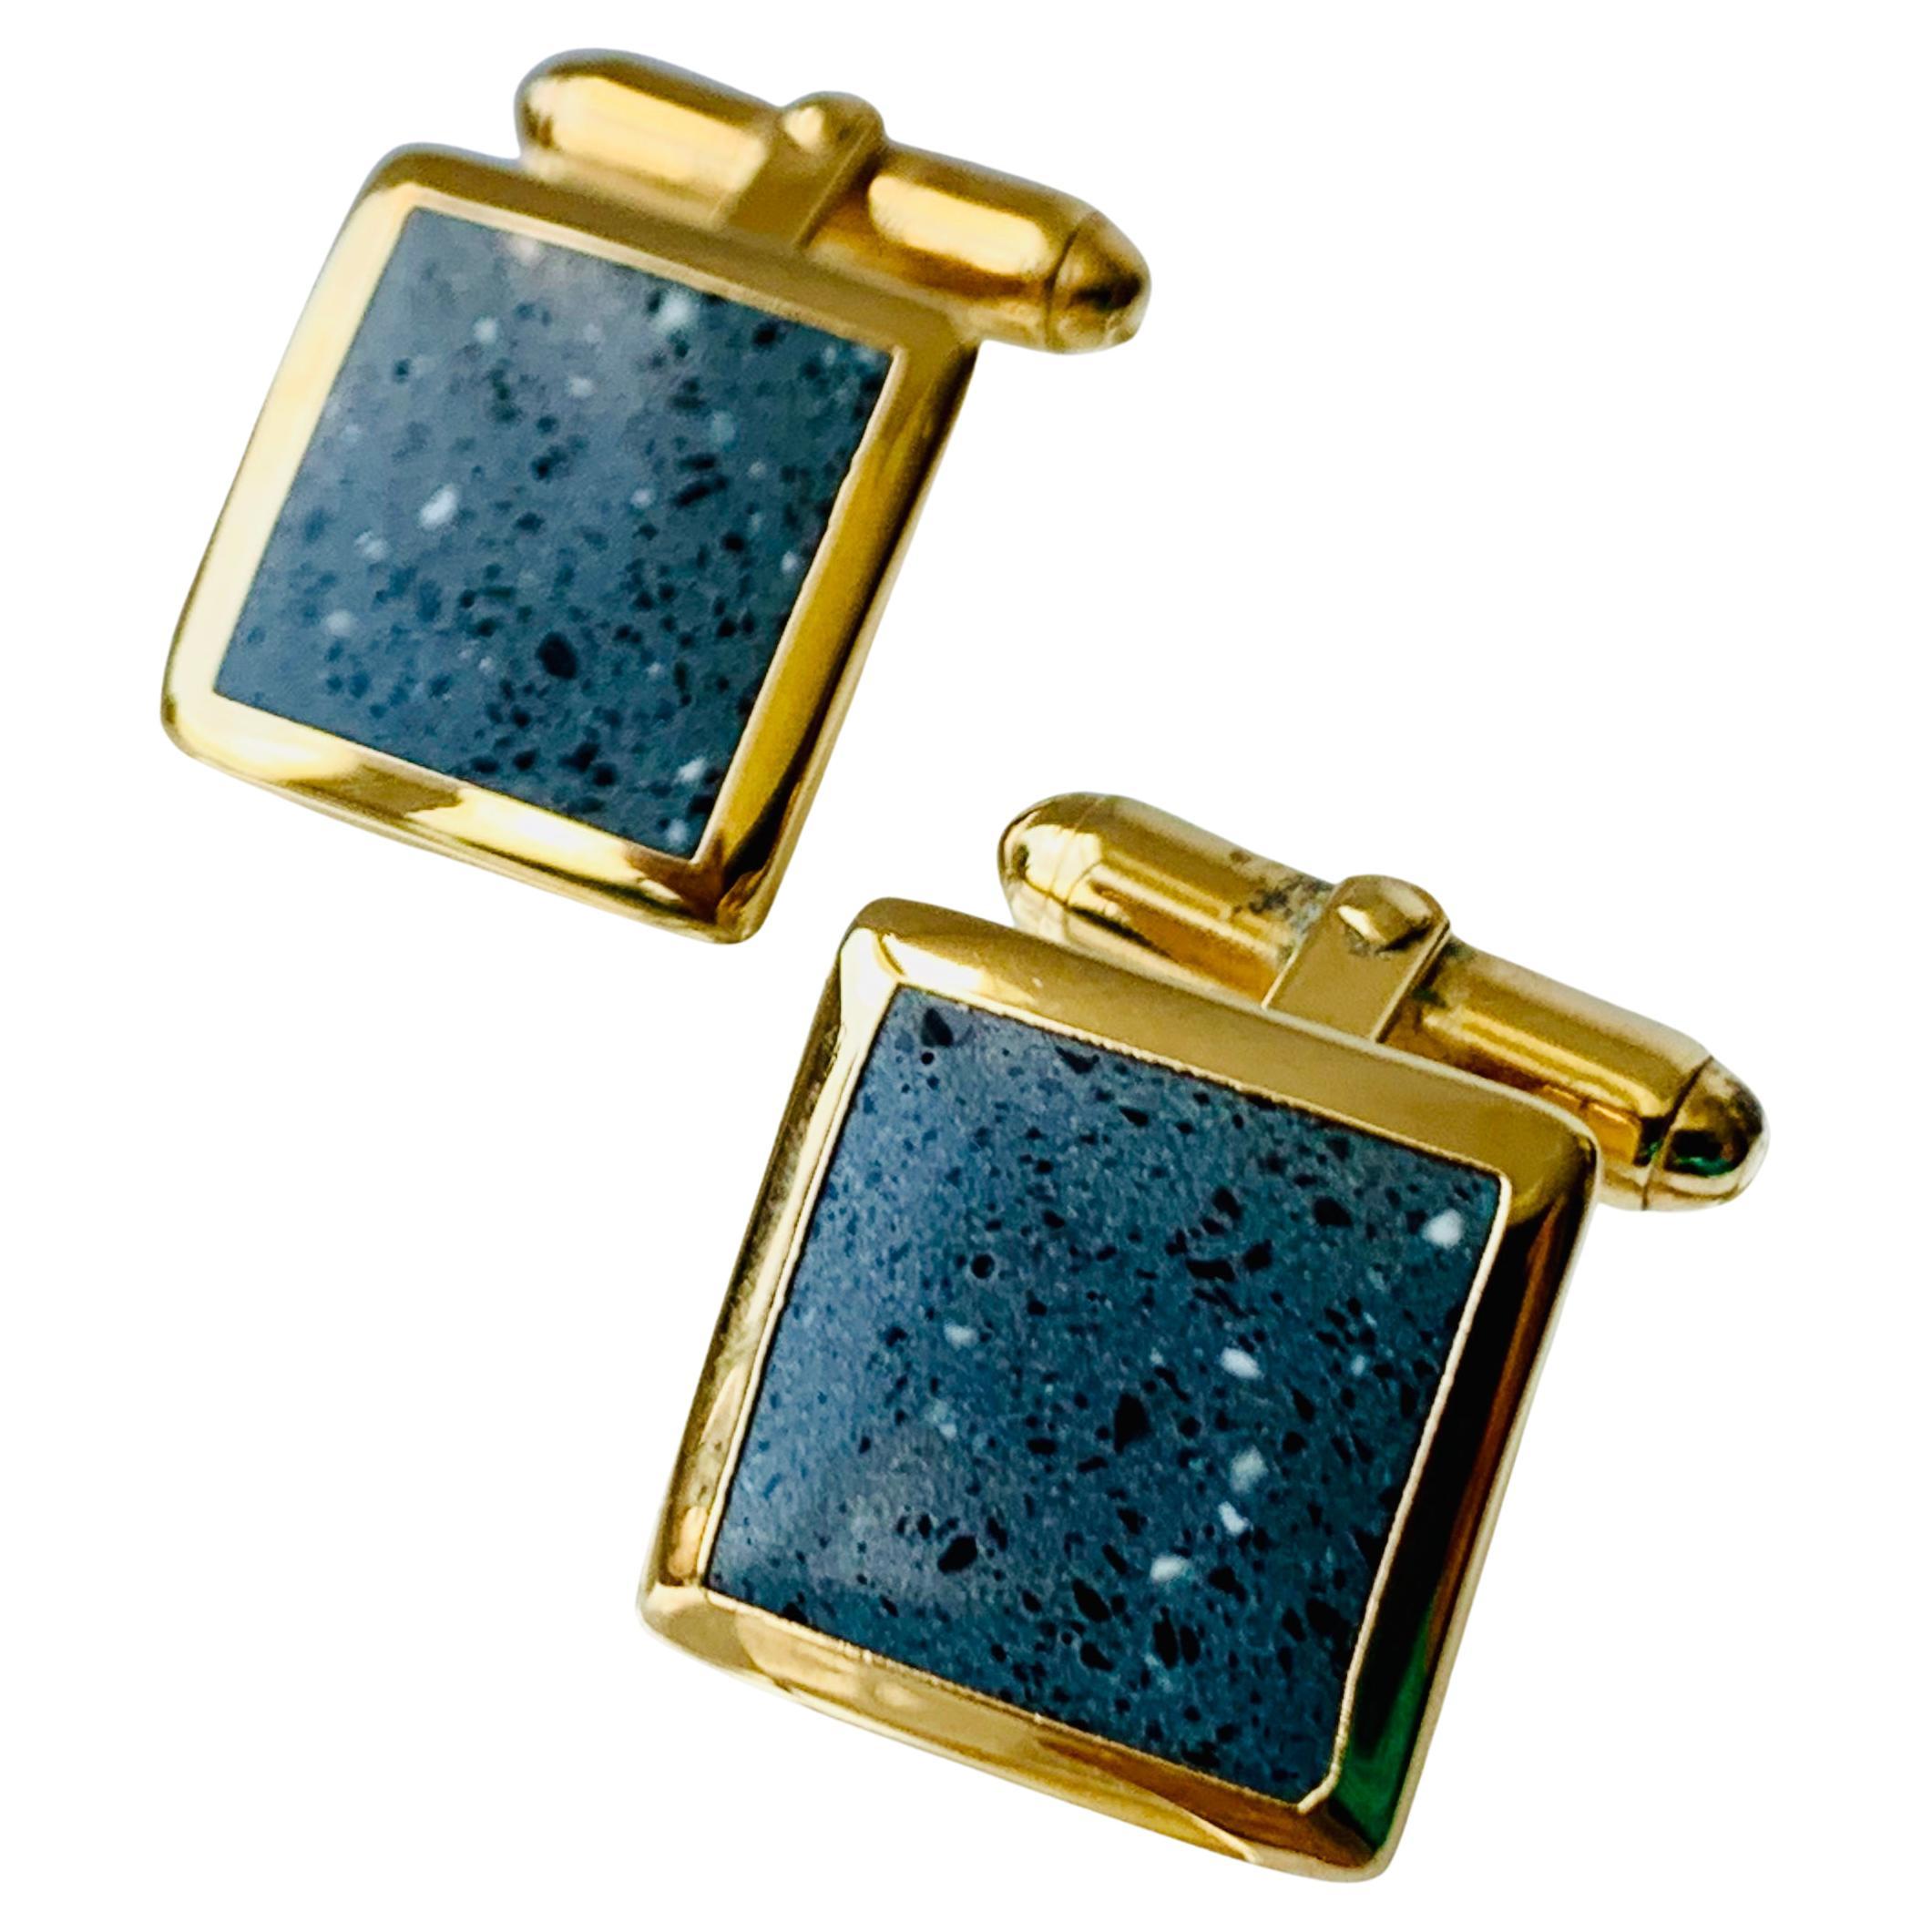 A Pair of Square Cufflinks with Grey Speckled Enamel and "T" Backs